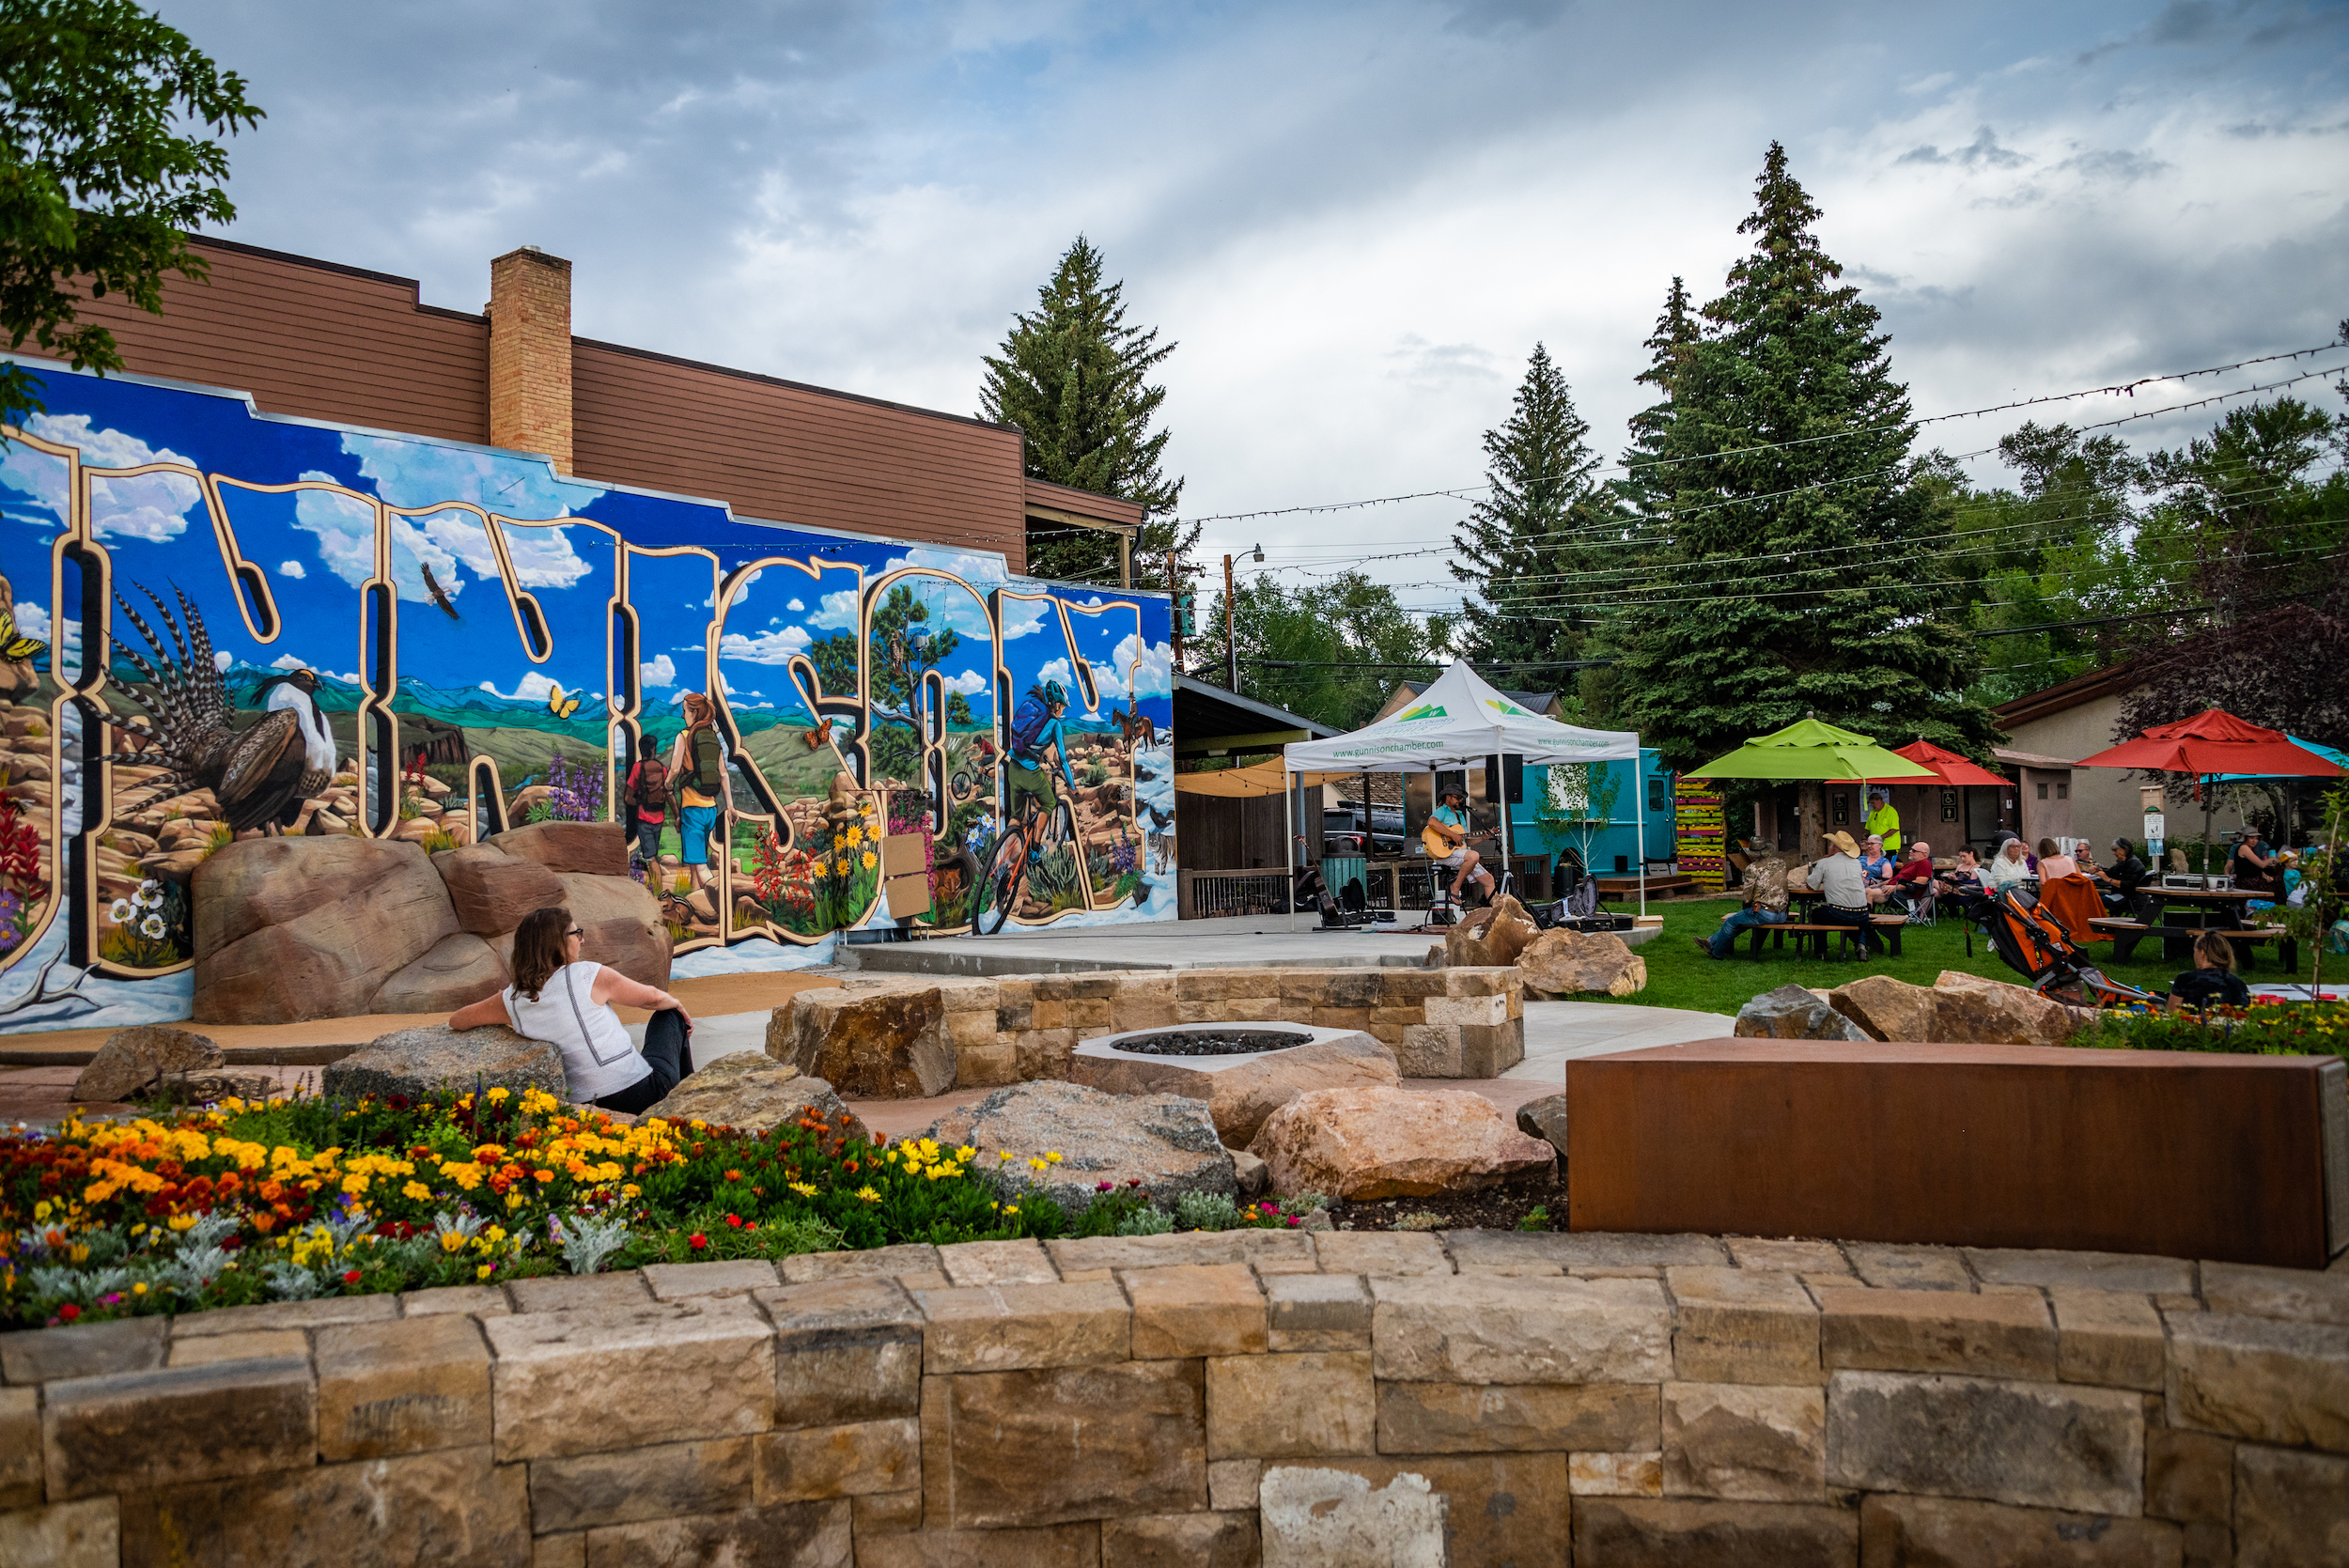 A park with a stage, mural that says "Gunnison," tables with umbrellas and someone playing music. 